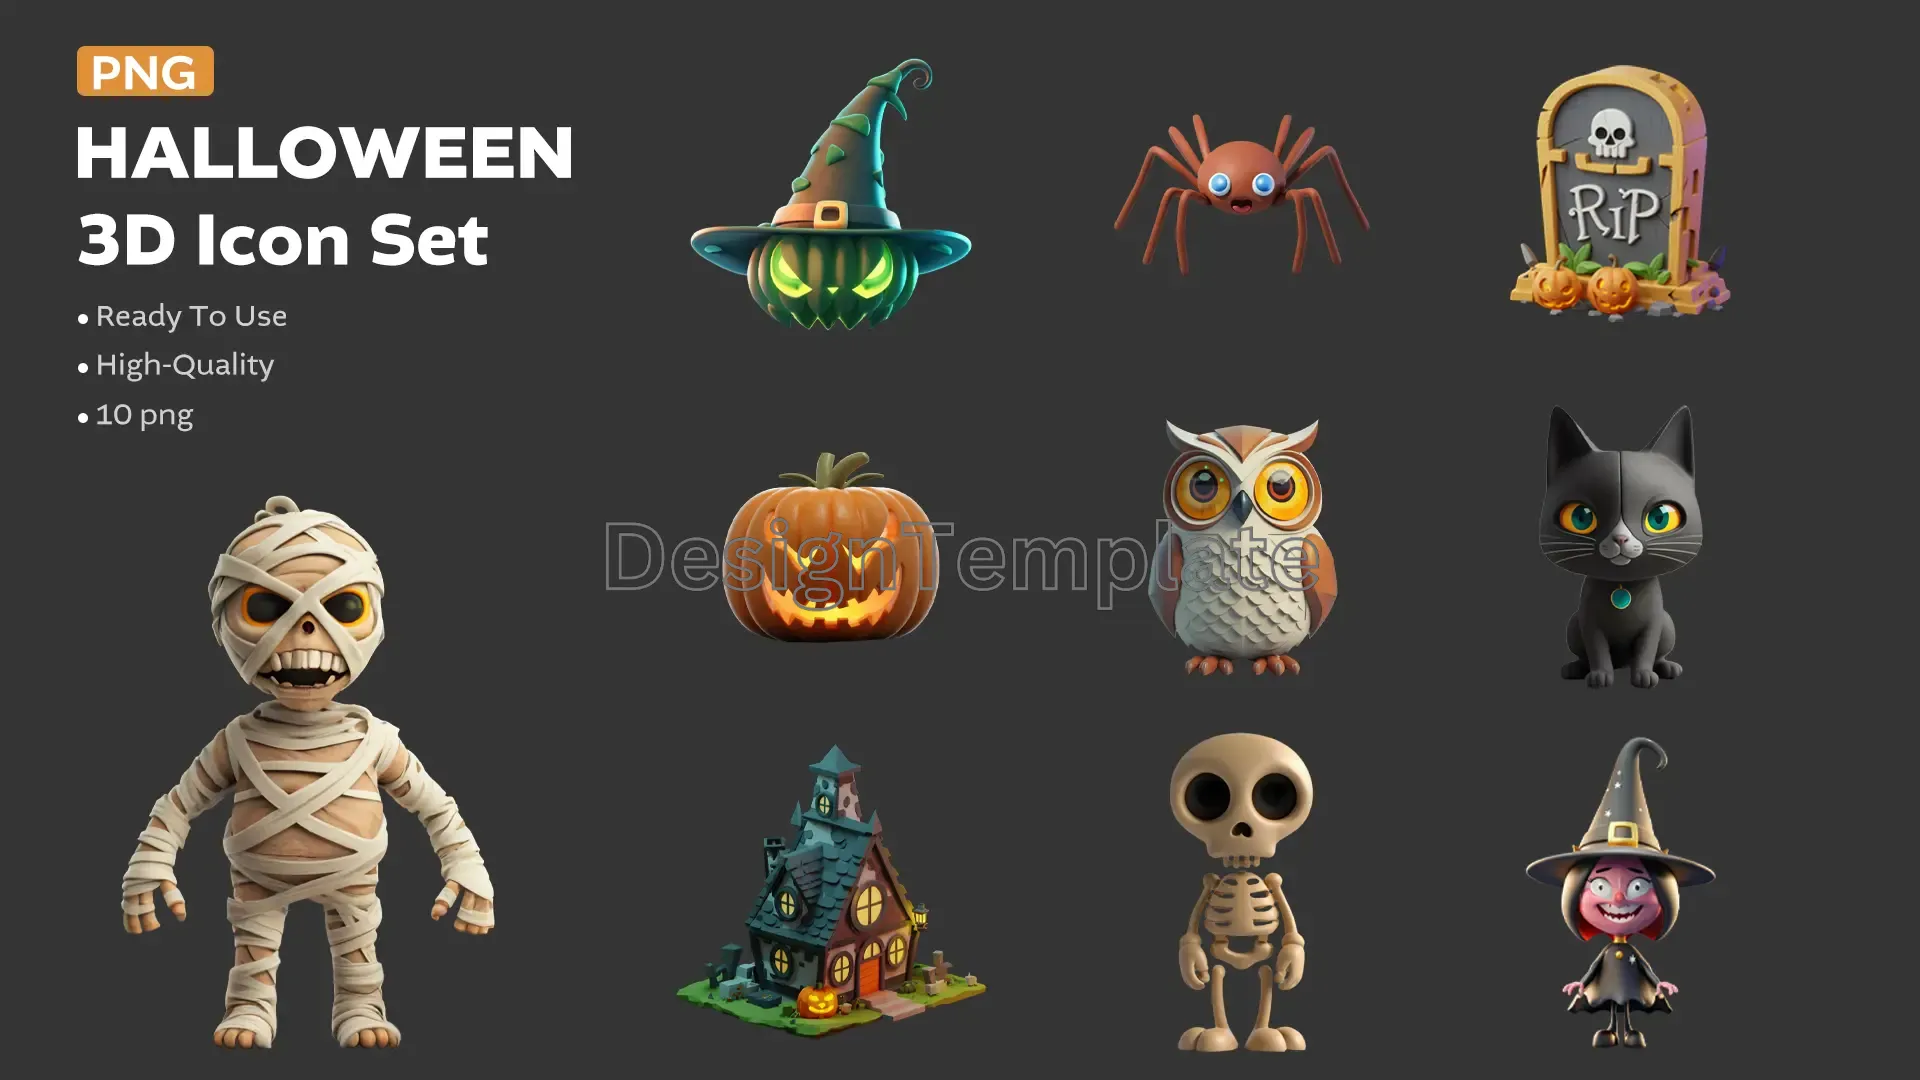 Creepy Characters Halloween 3D Elements Pack image